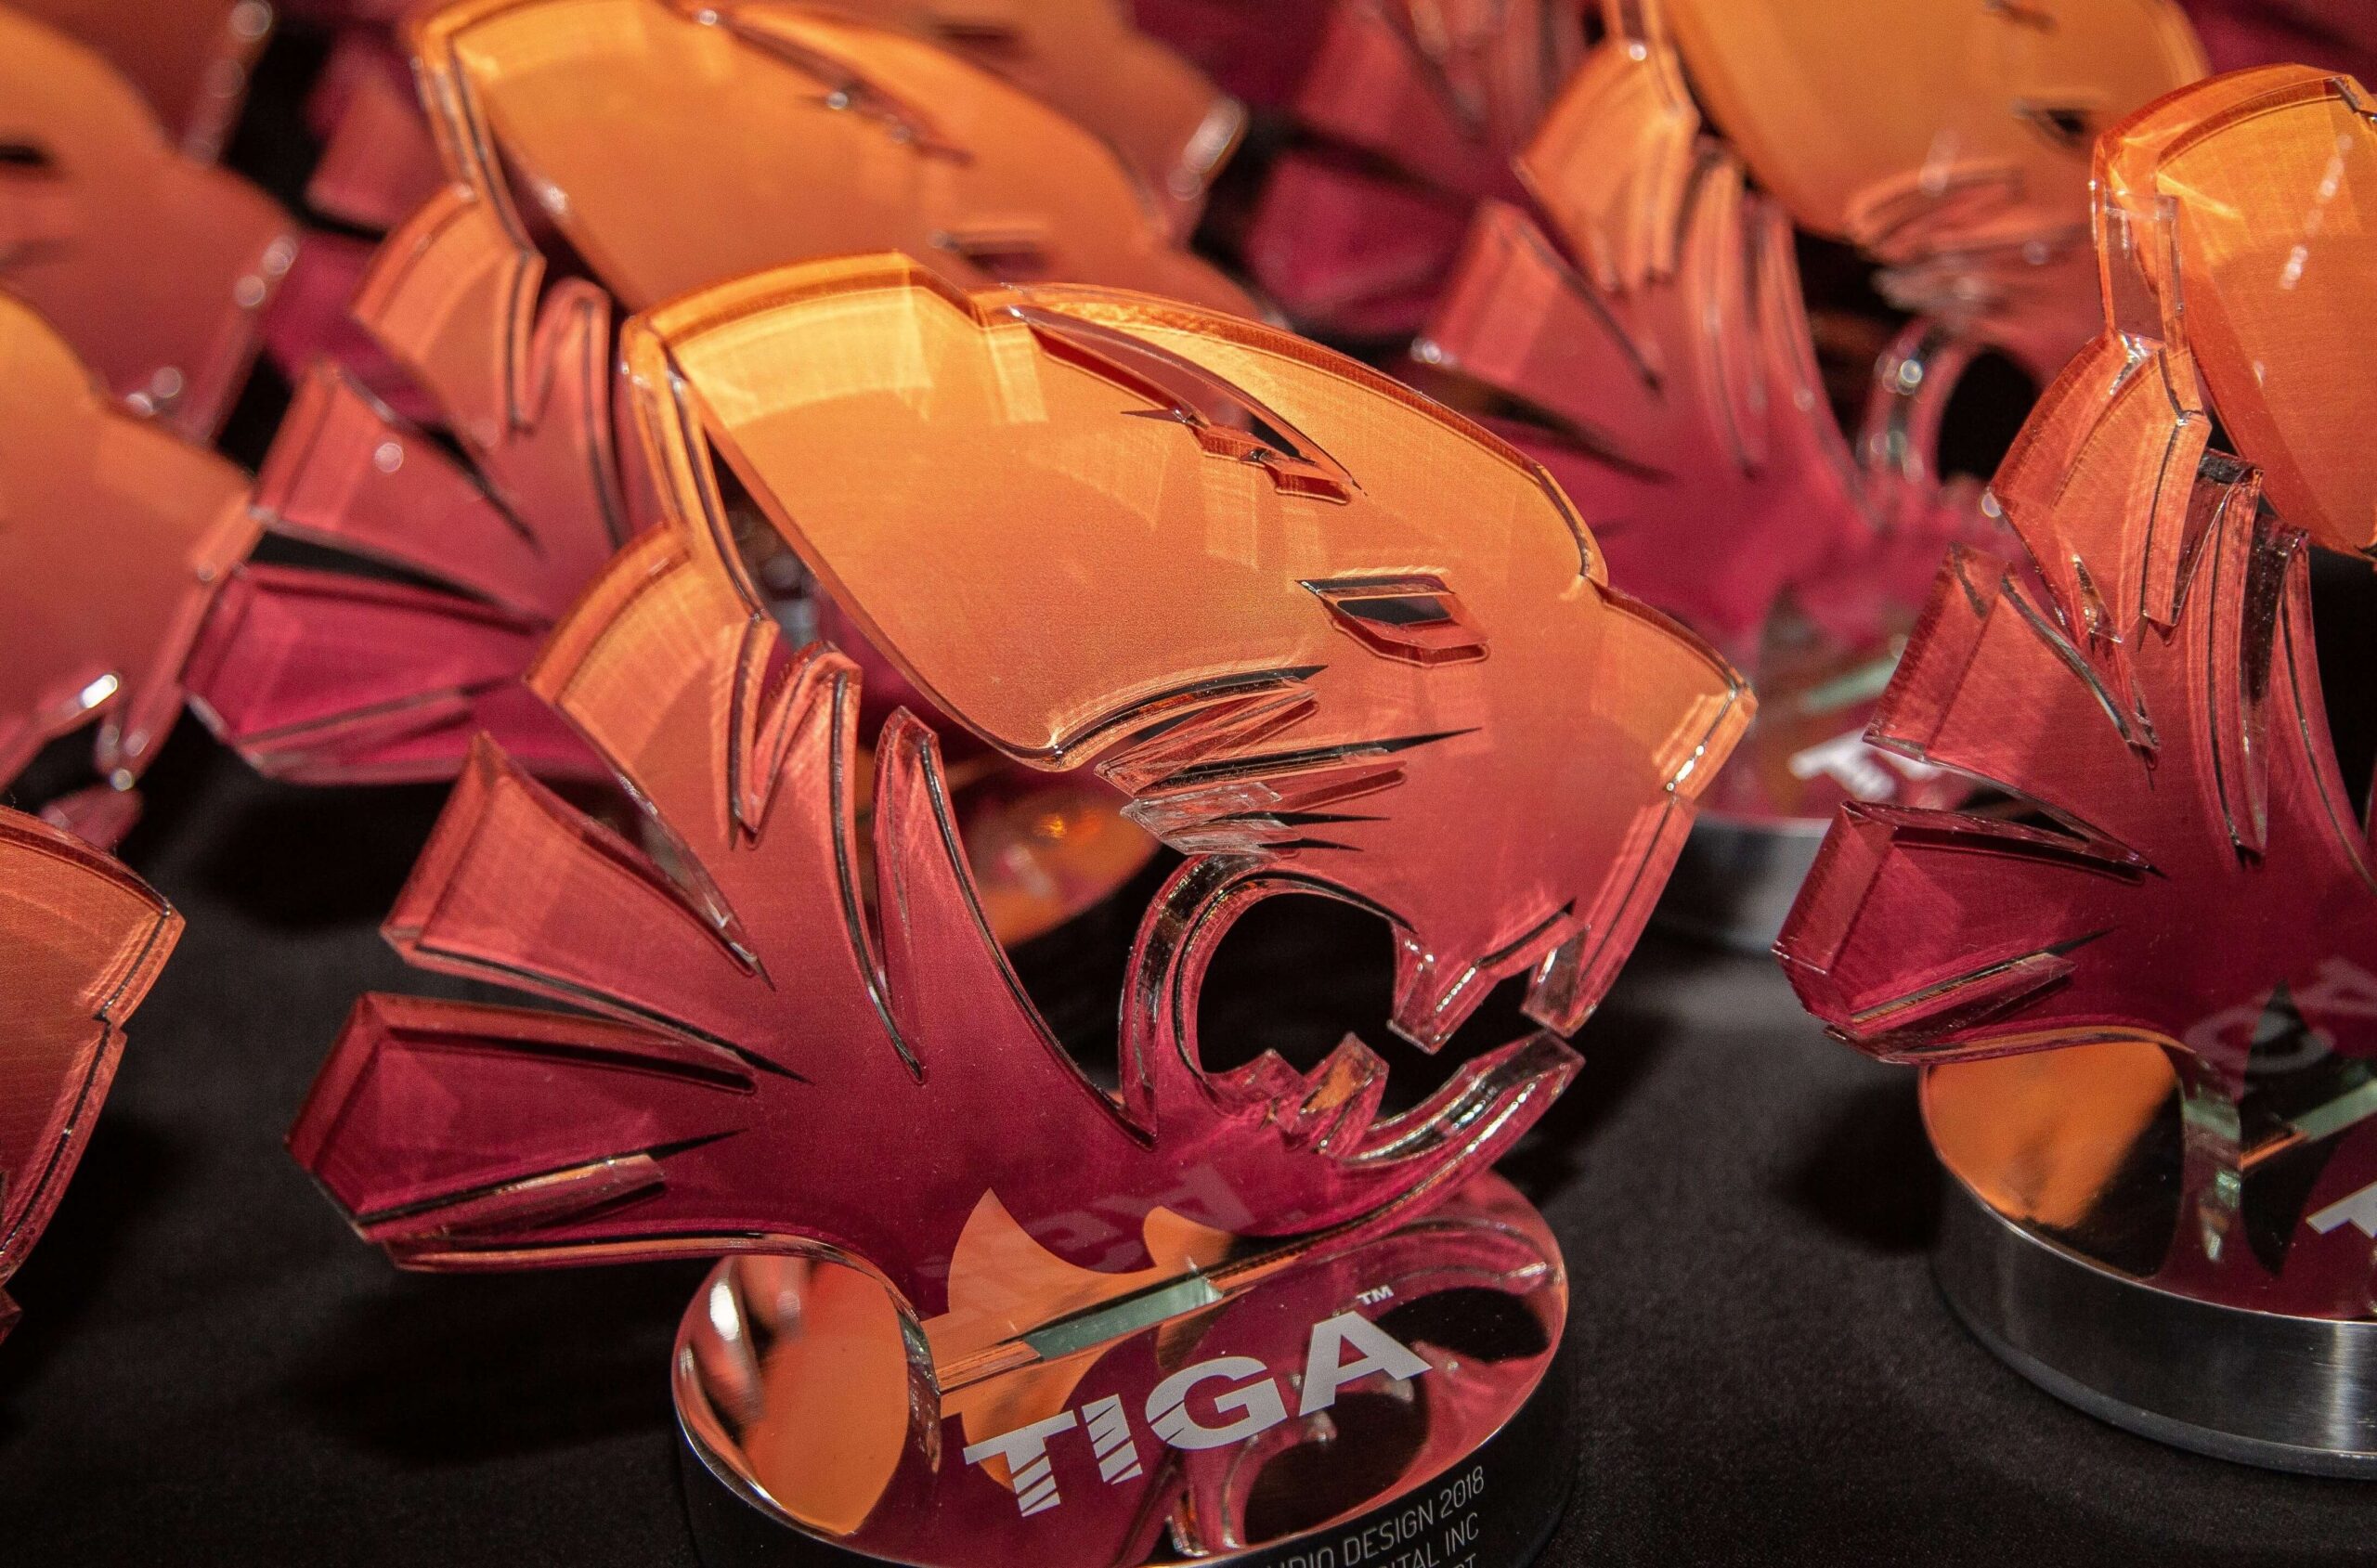 The TIGA Games Industry Award Winners 2022 are revealed! - TIGA